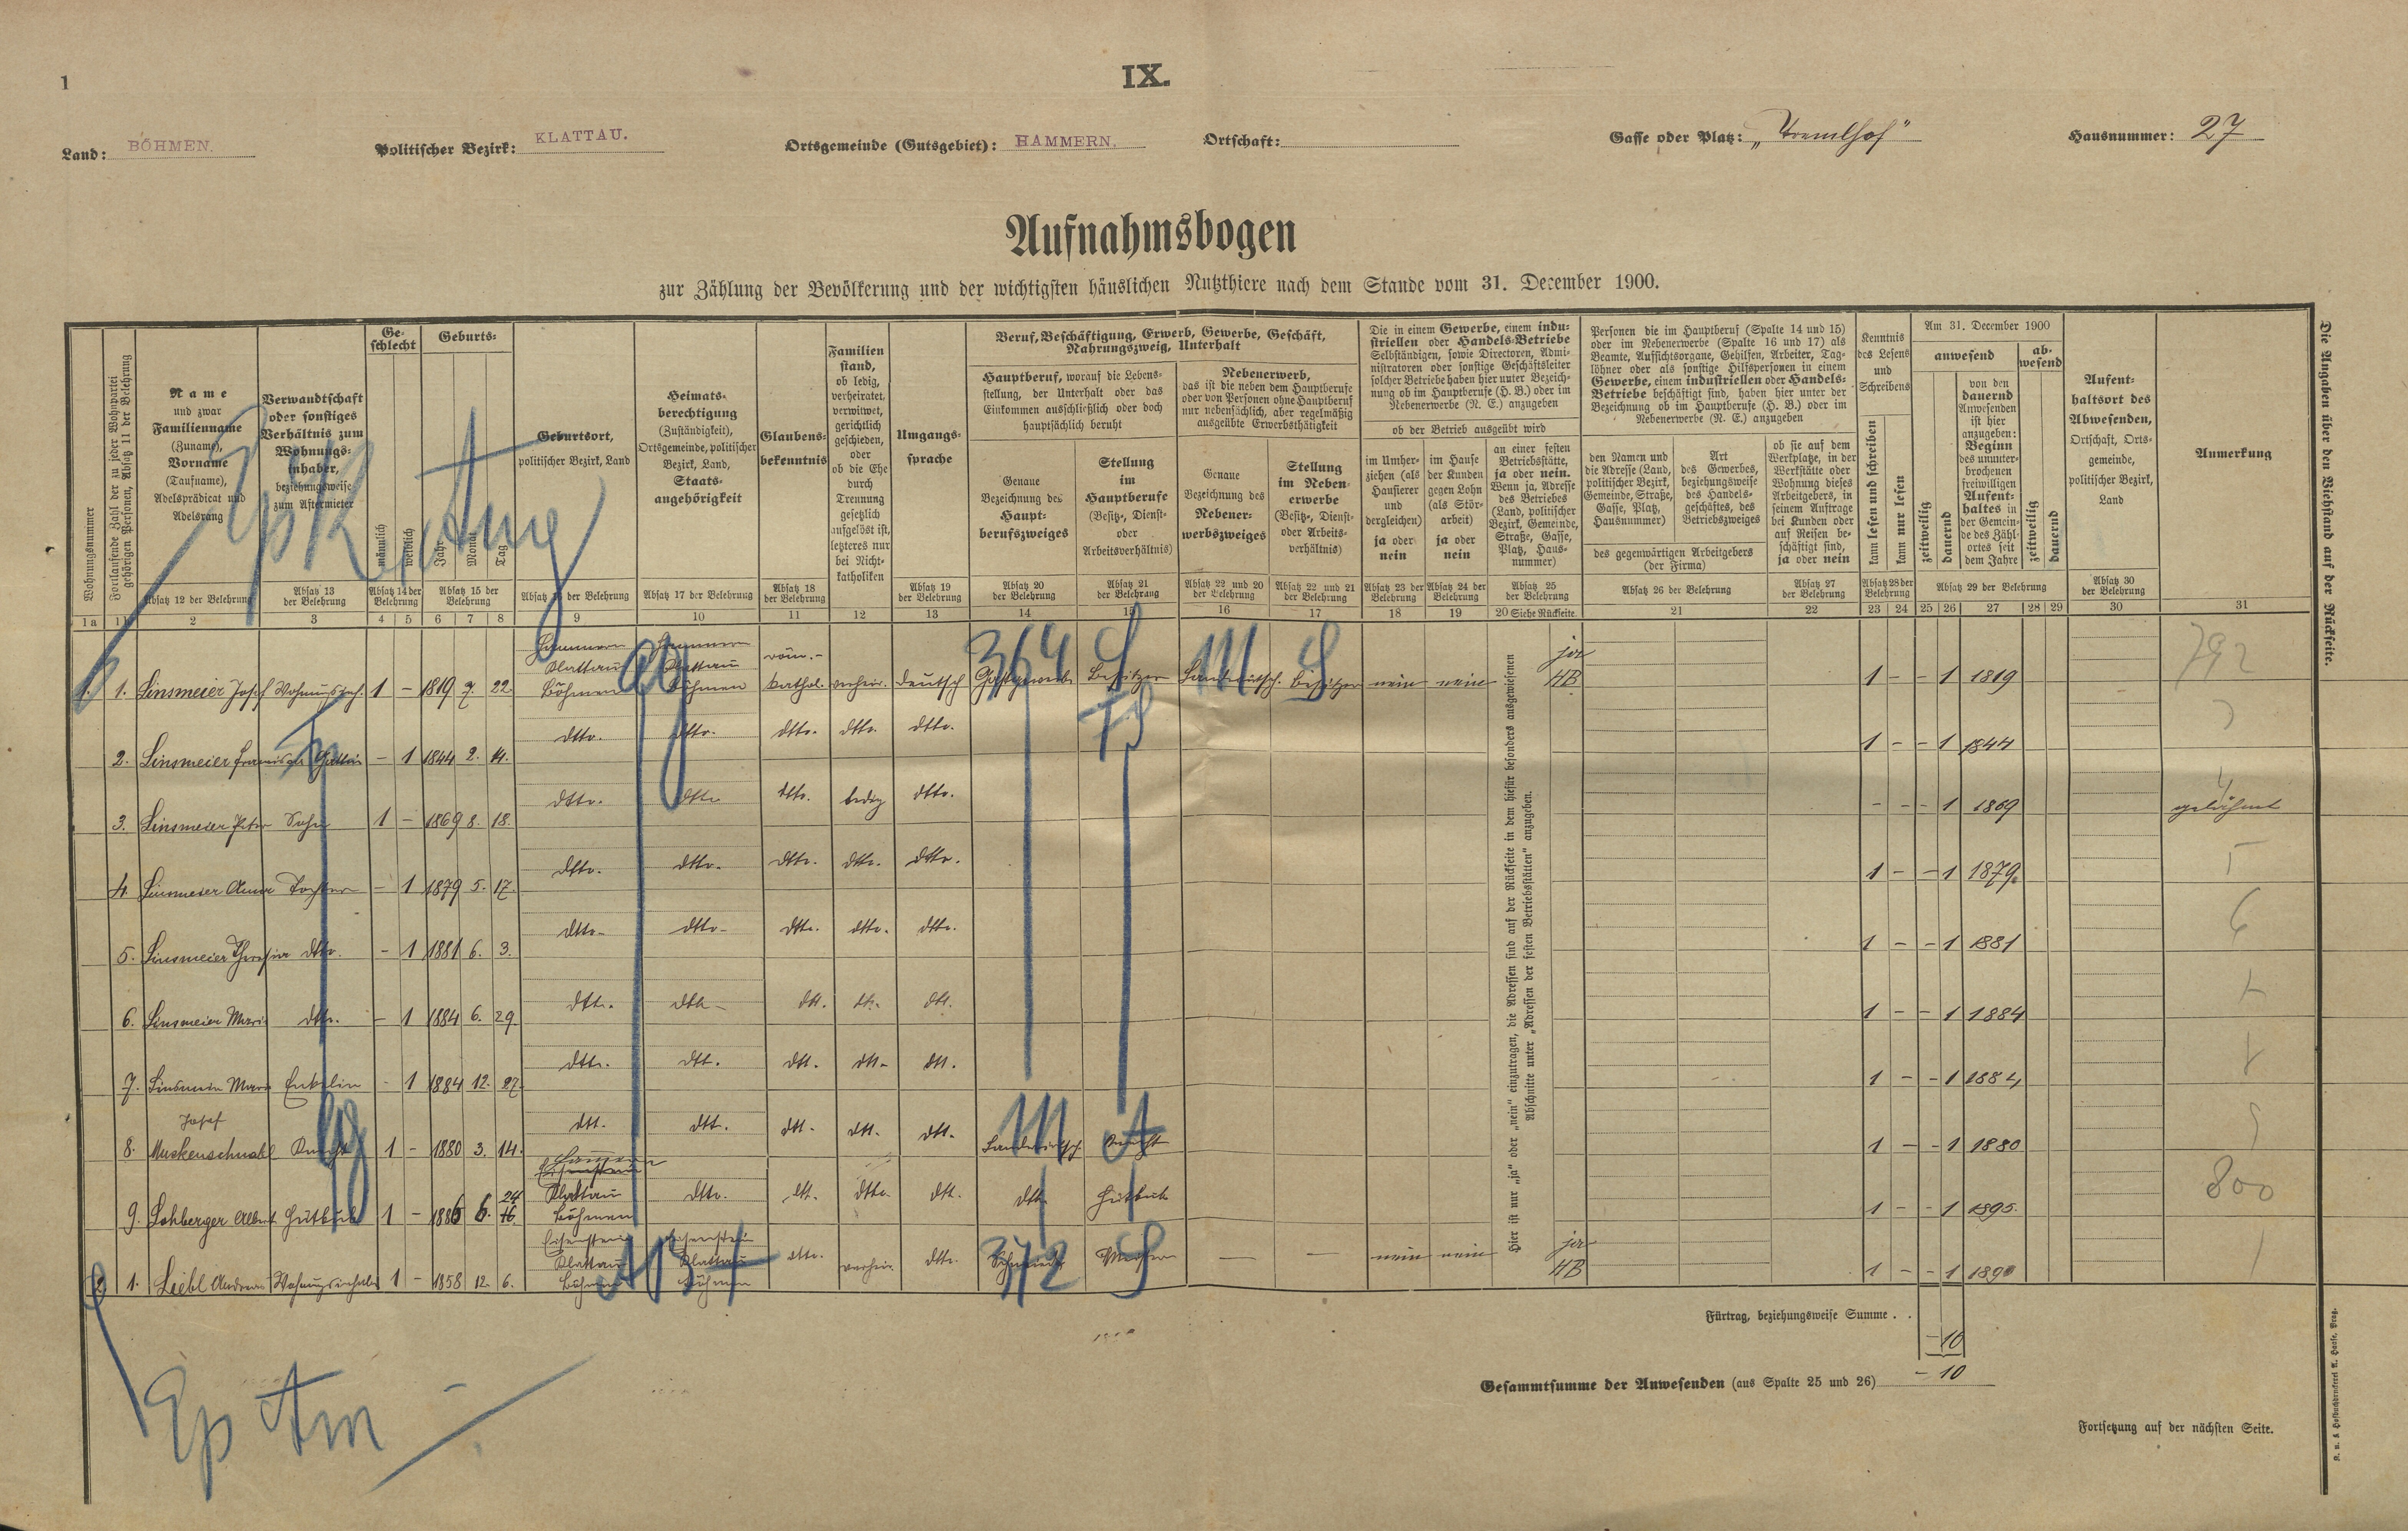 1. soap-kt_01159_census-1900-hamry-cp027_0010